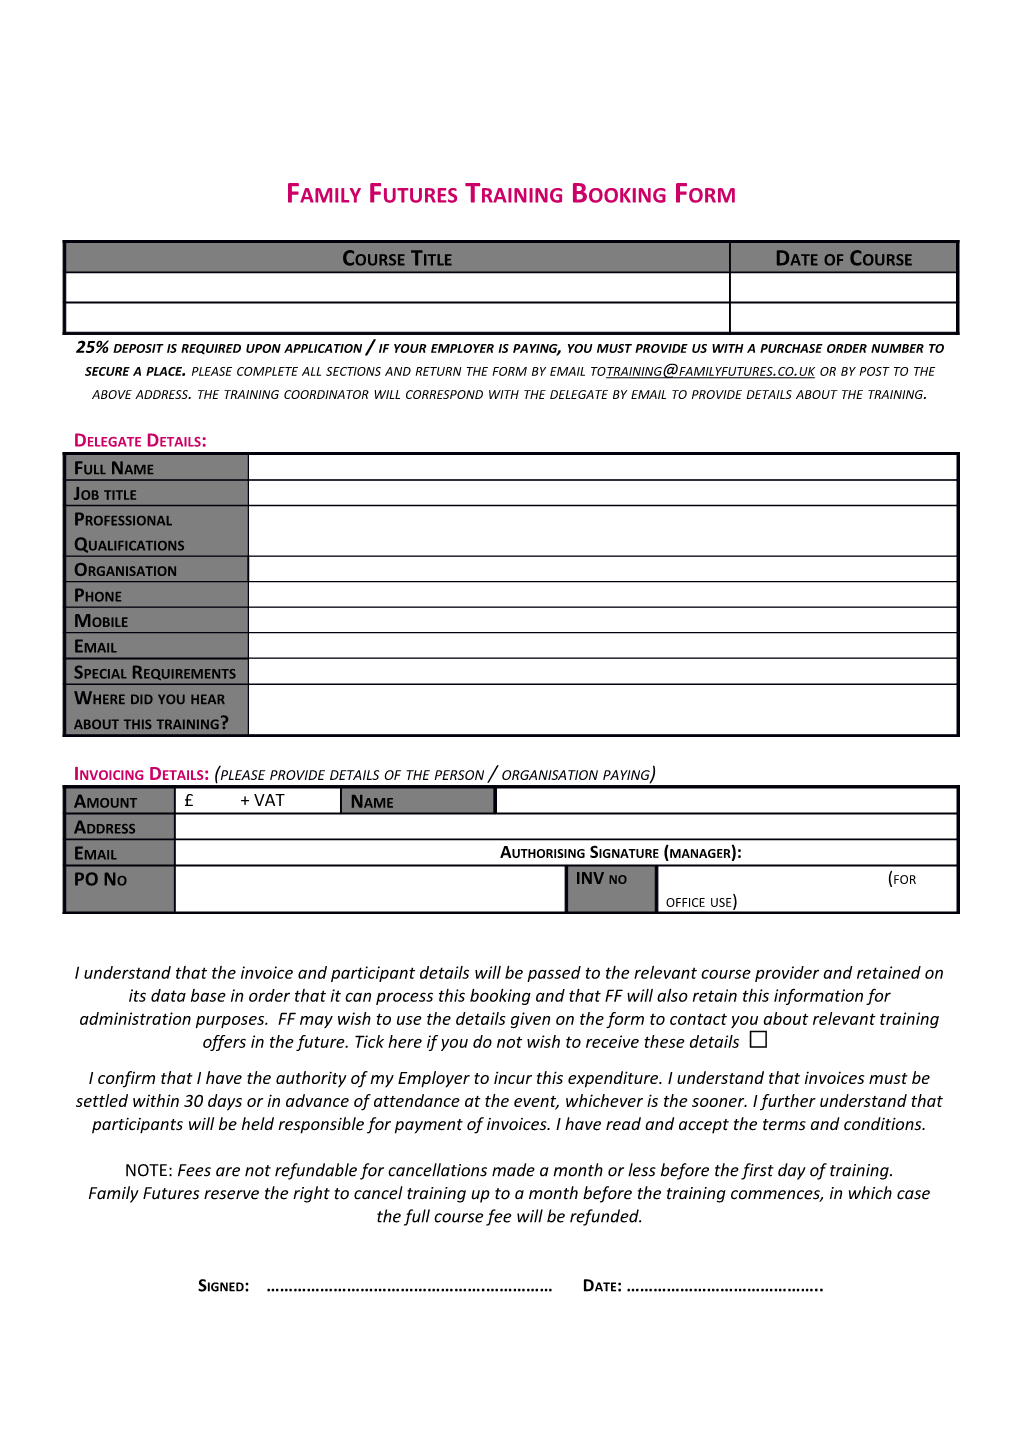 Family Futures Training Booking Form